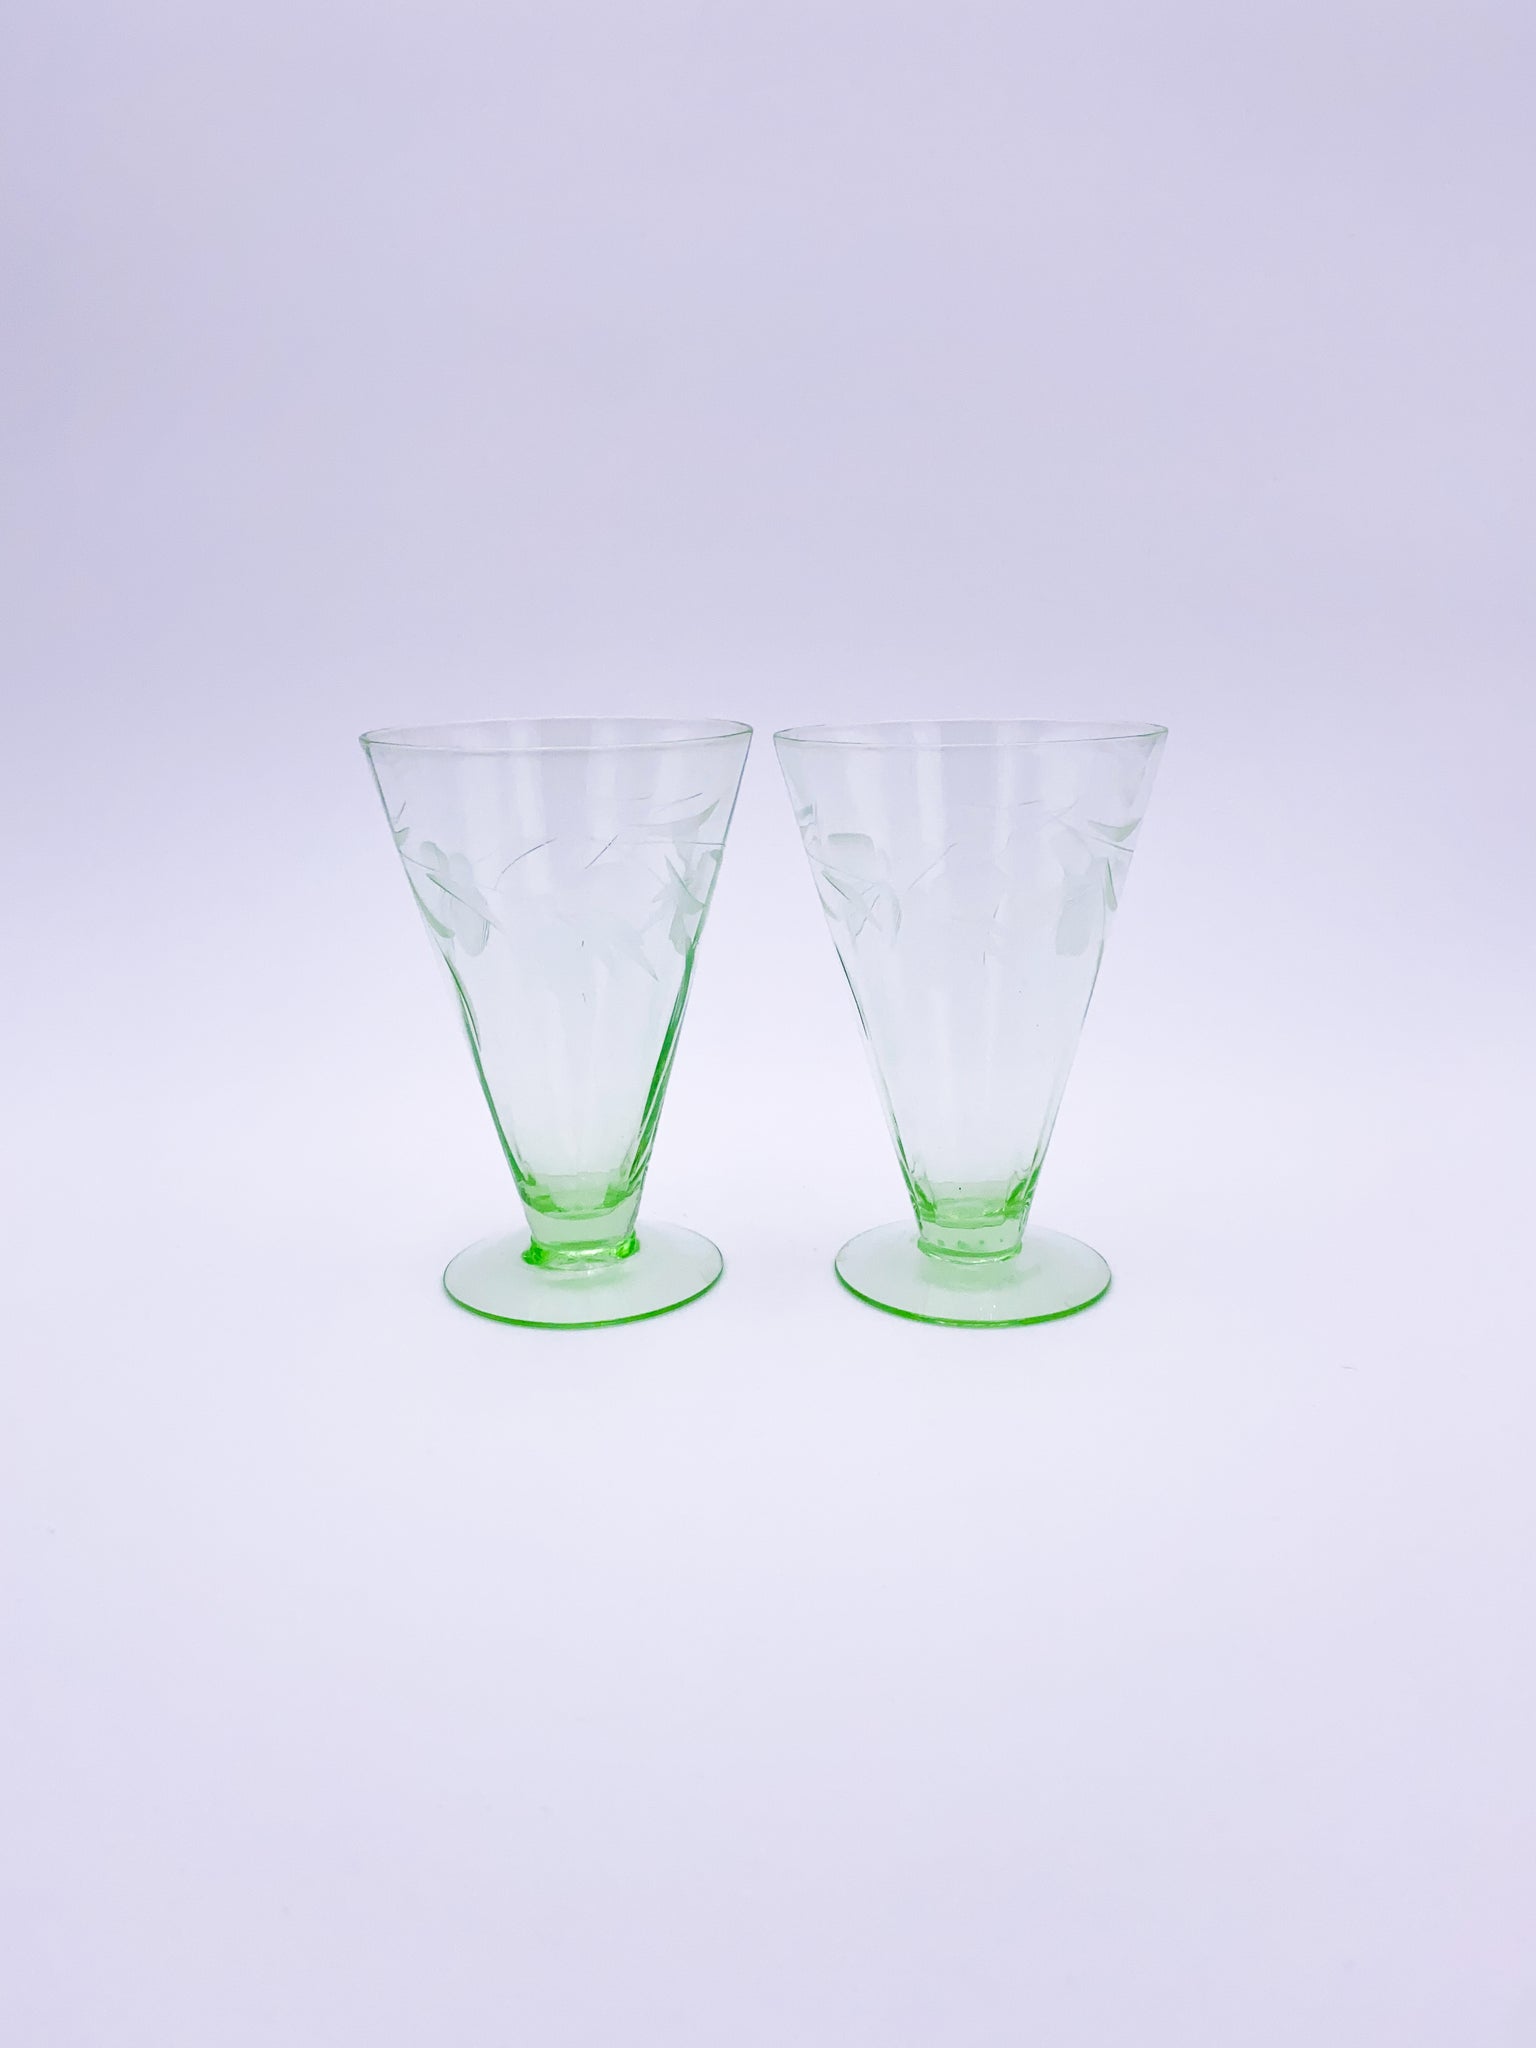 Set of 2 Etched Footed Tumbler Glasses